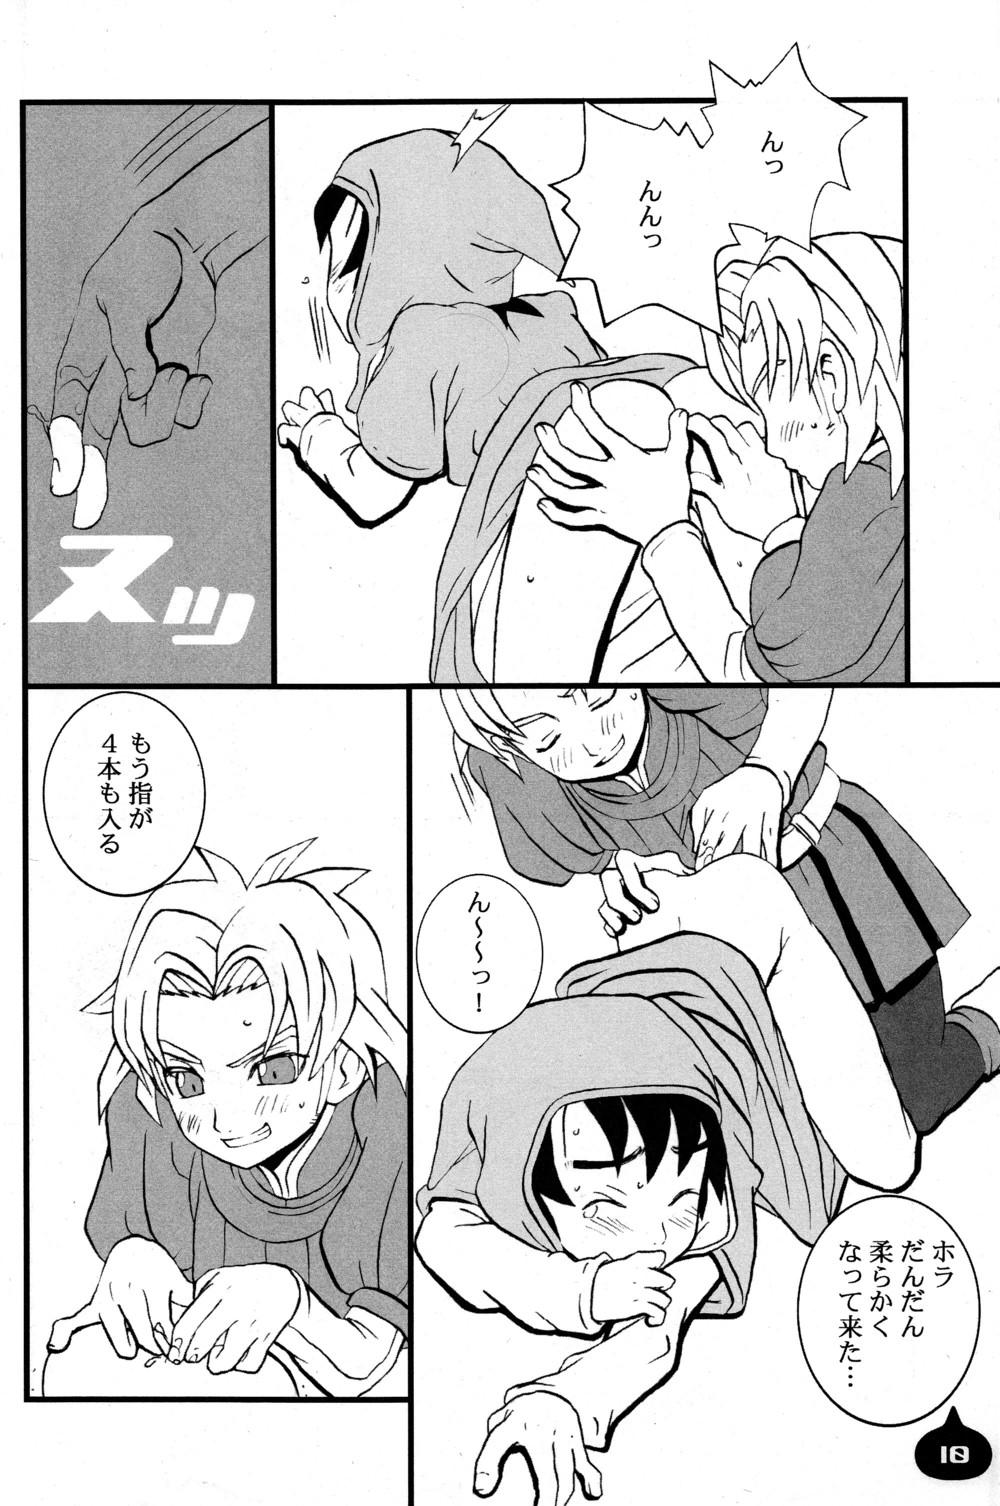 Anime LITTLE L - Dragon quest vii Lord of lords ryu knight | haou taikei ryuu knight Gay Deepthroat - Page 9